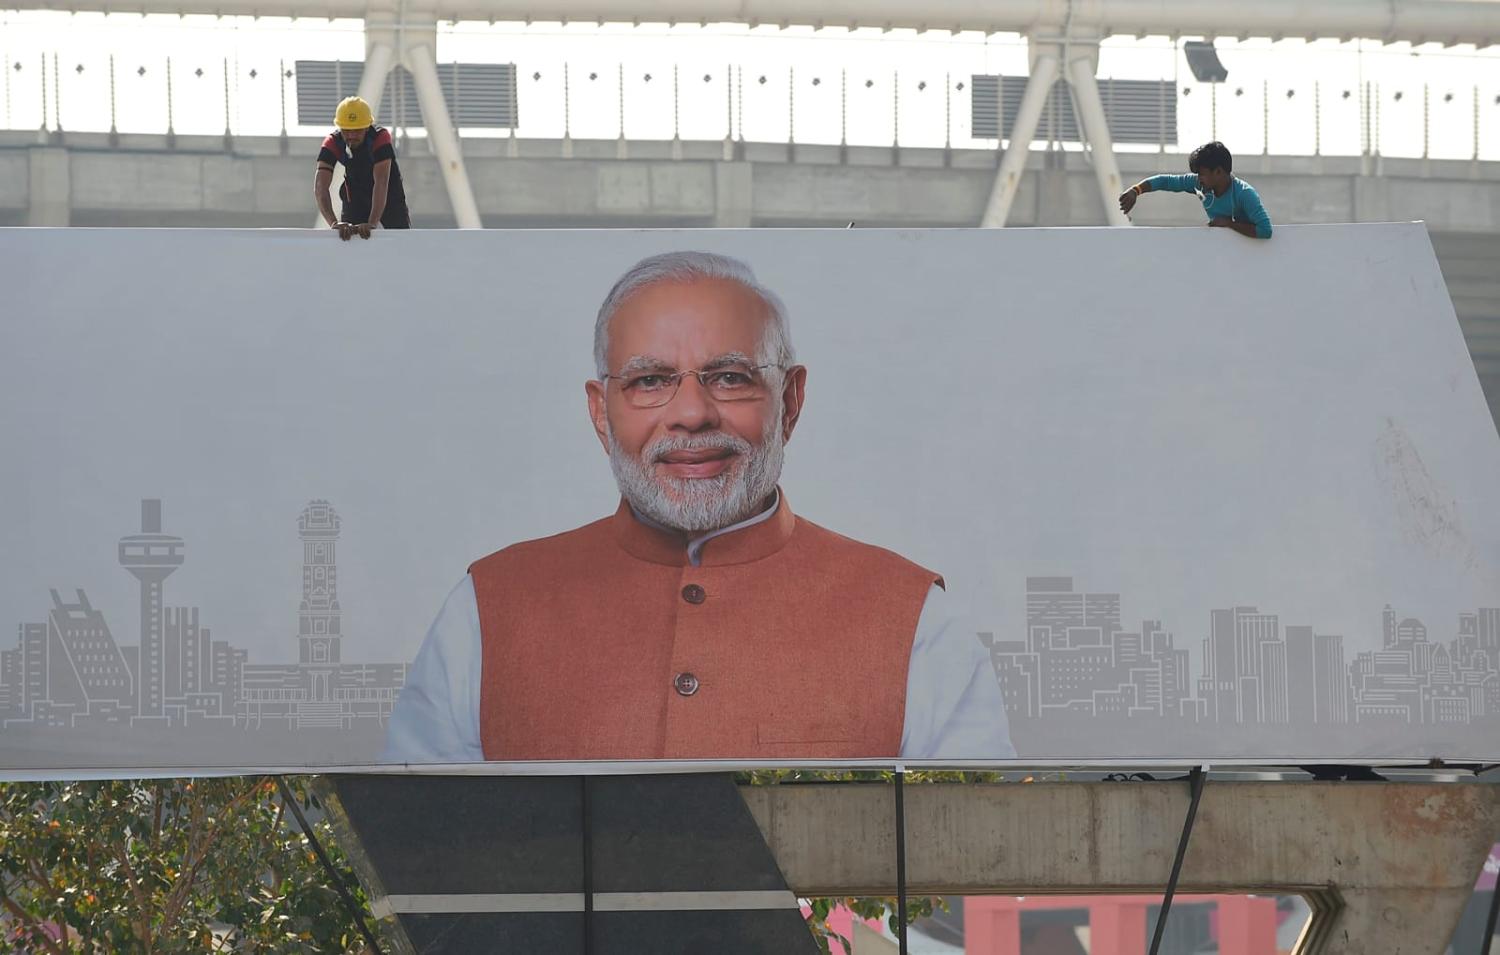 A giant billboard featuring Indian Prime Minister Narendra Modi in Ahmedabad, 2020 (Sam Panthaky/AFP via Getty Images)